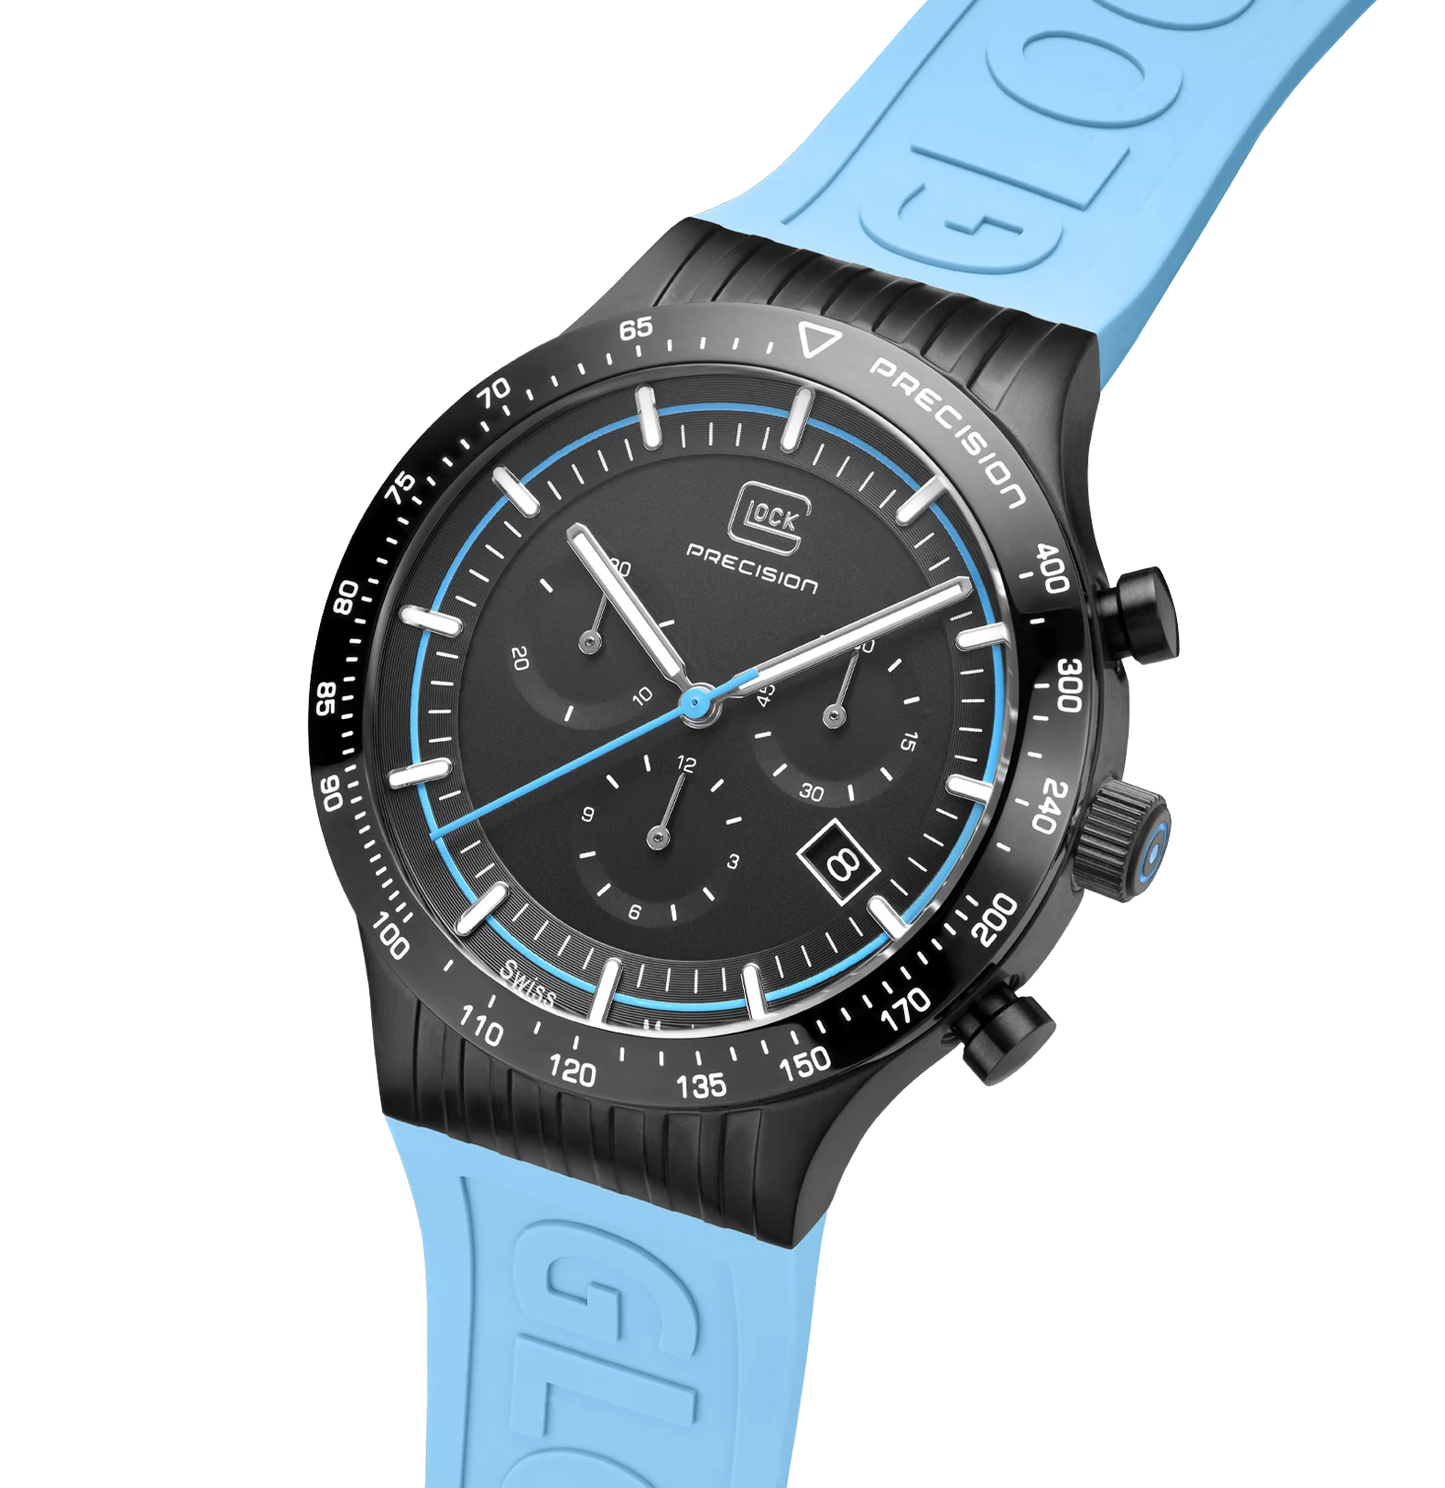 Men's Glock Watch in Black with Blue Silicone Band